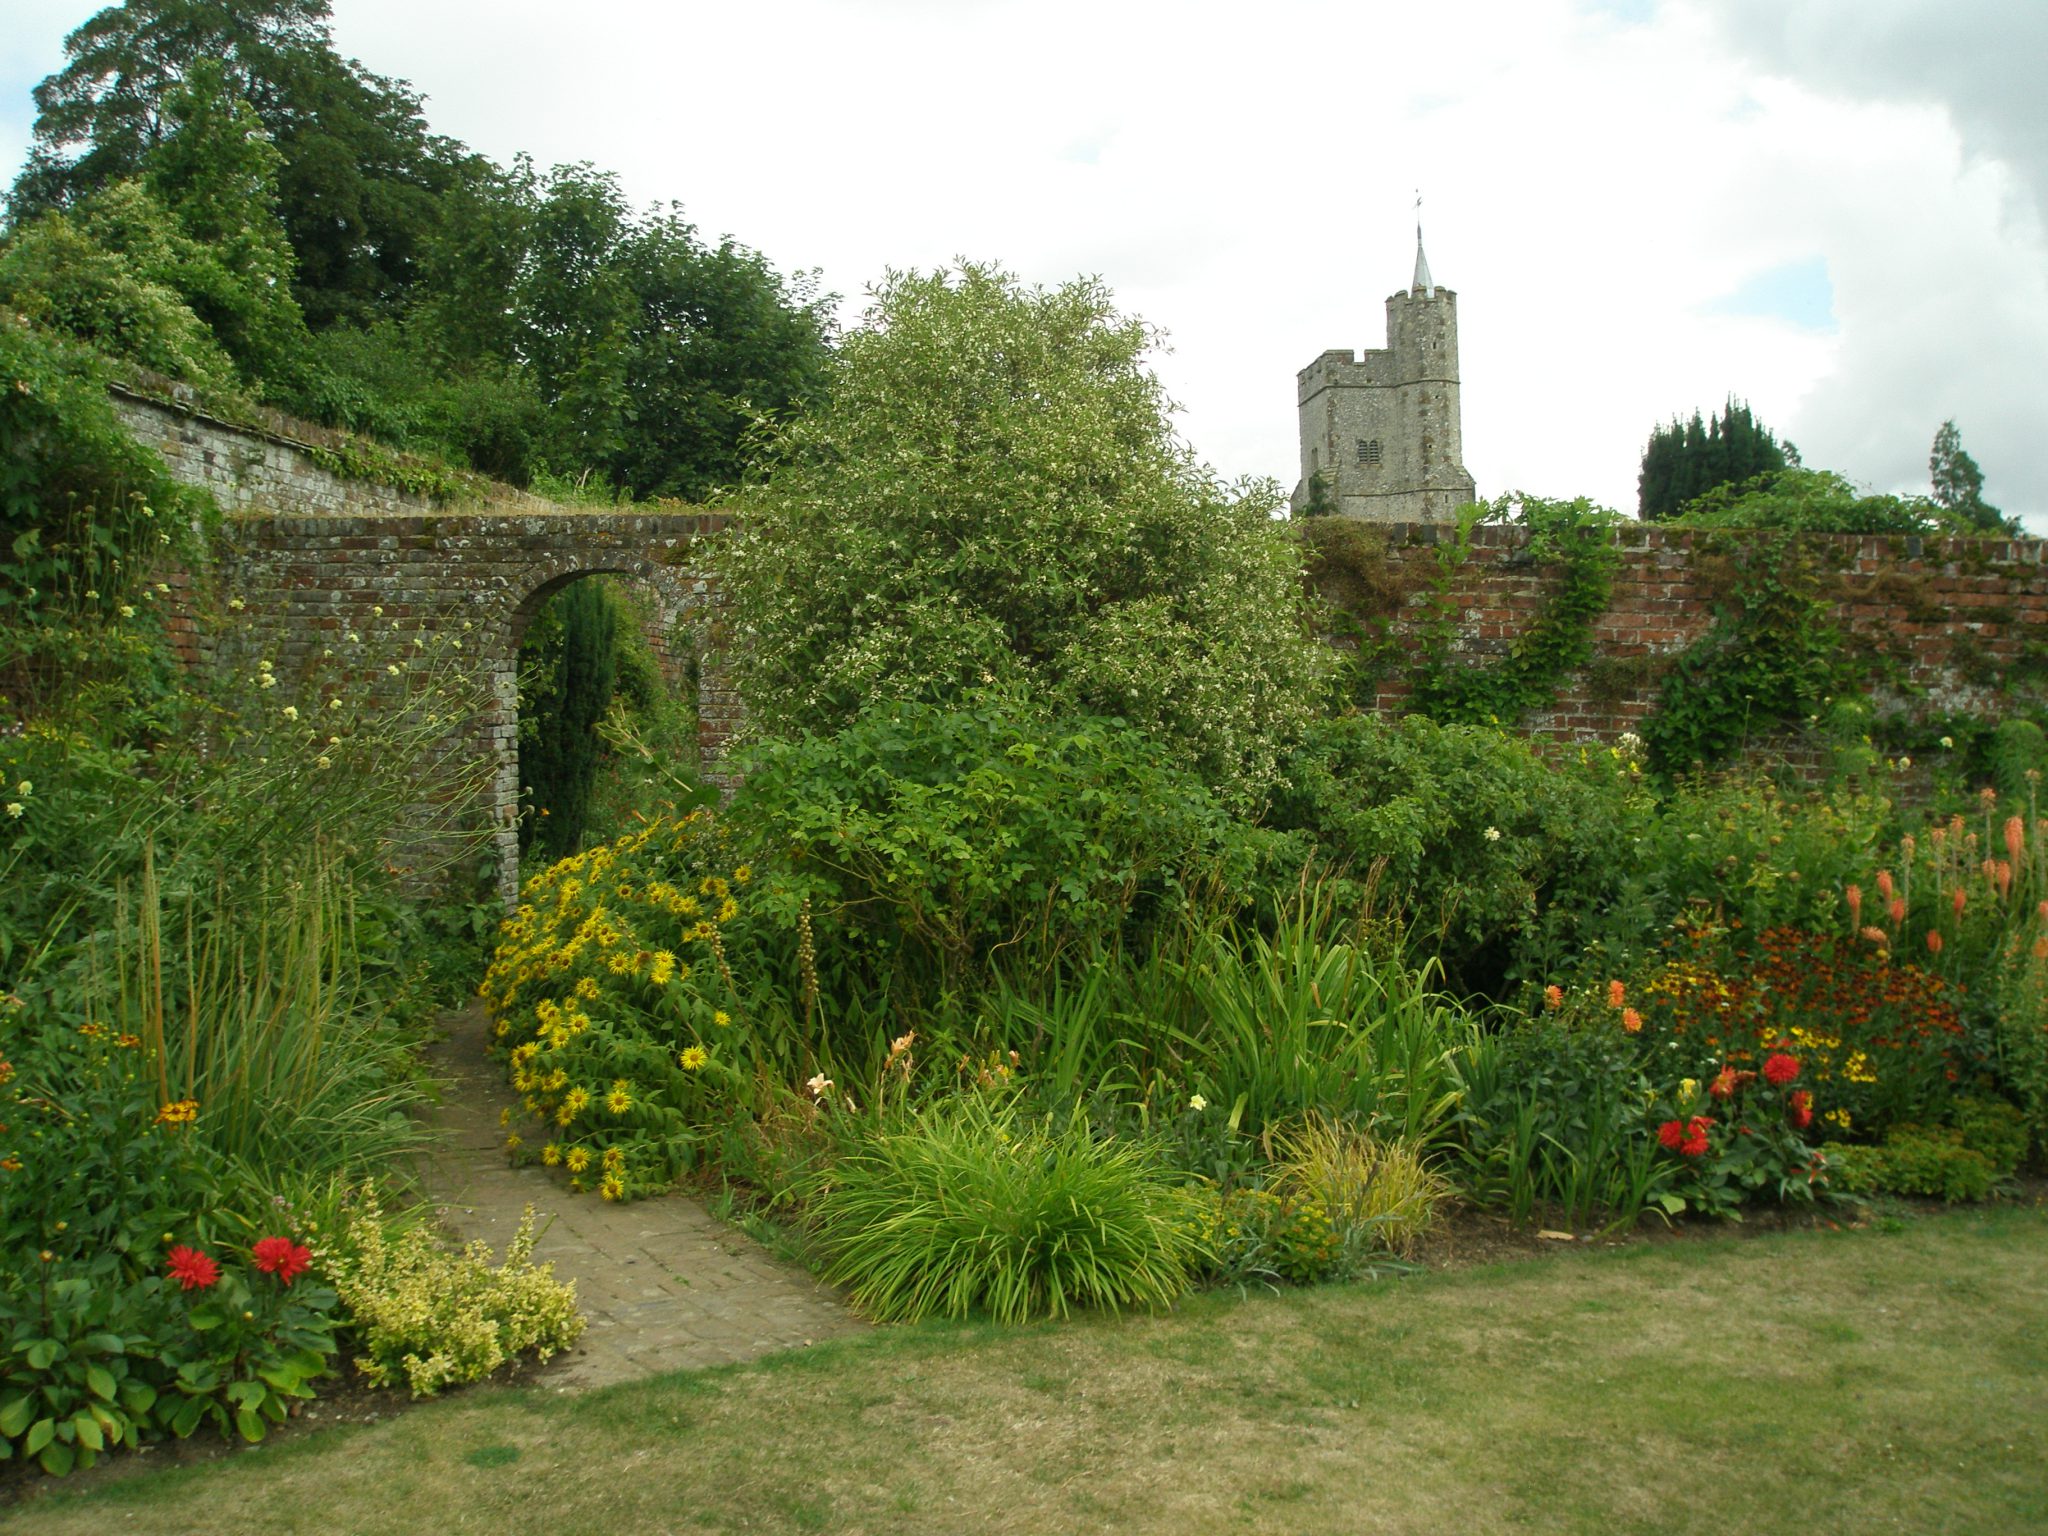 Another corner of the extensive Walled Garden (which is actually a series of walled gardens).